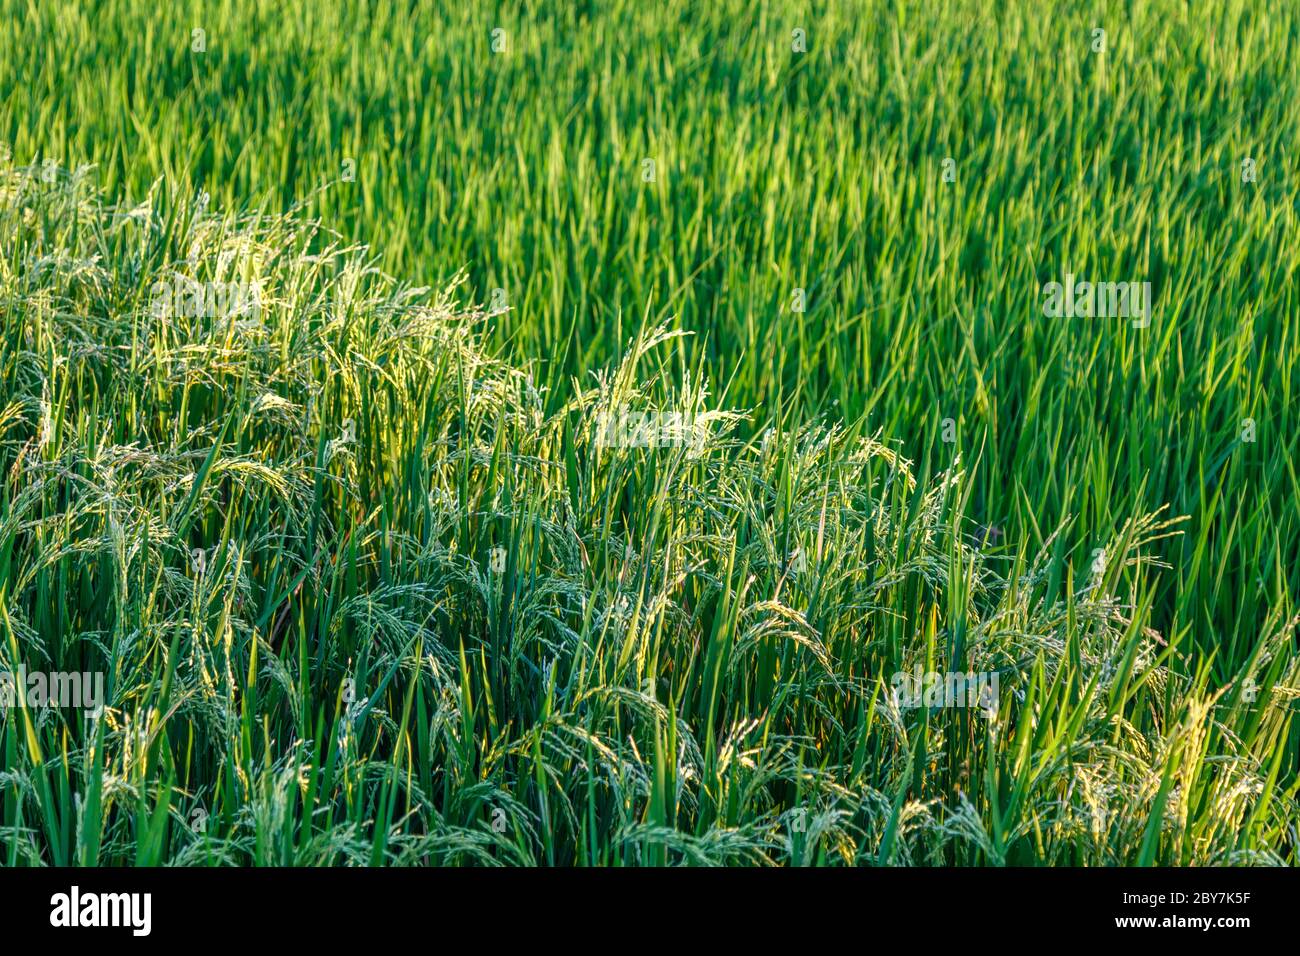 Rice field at two stages: ripe rice ready for harvesting and young growing rice. Bali Island, Indonesia. Stock Photo